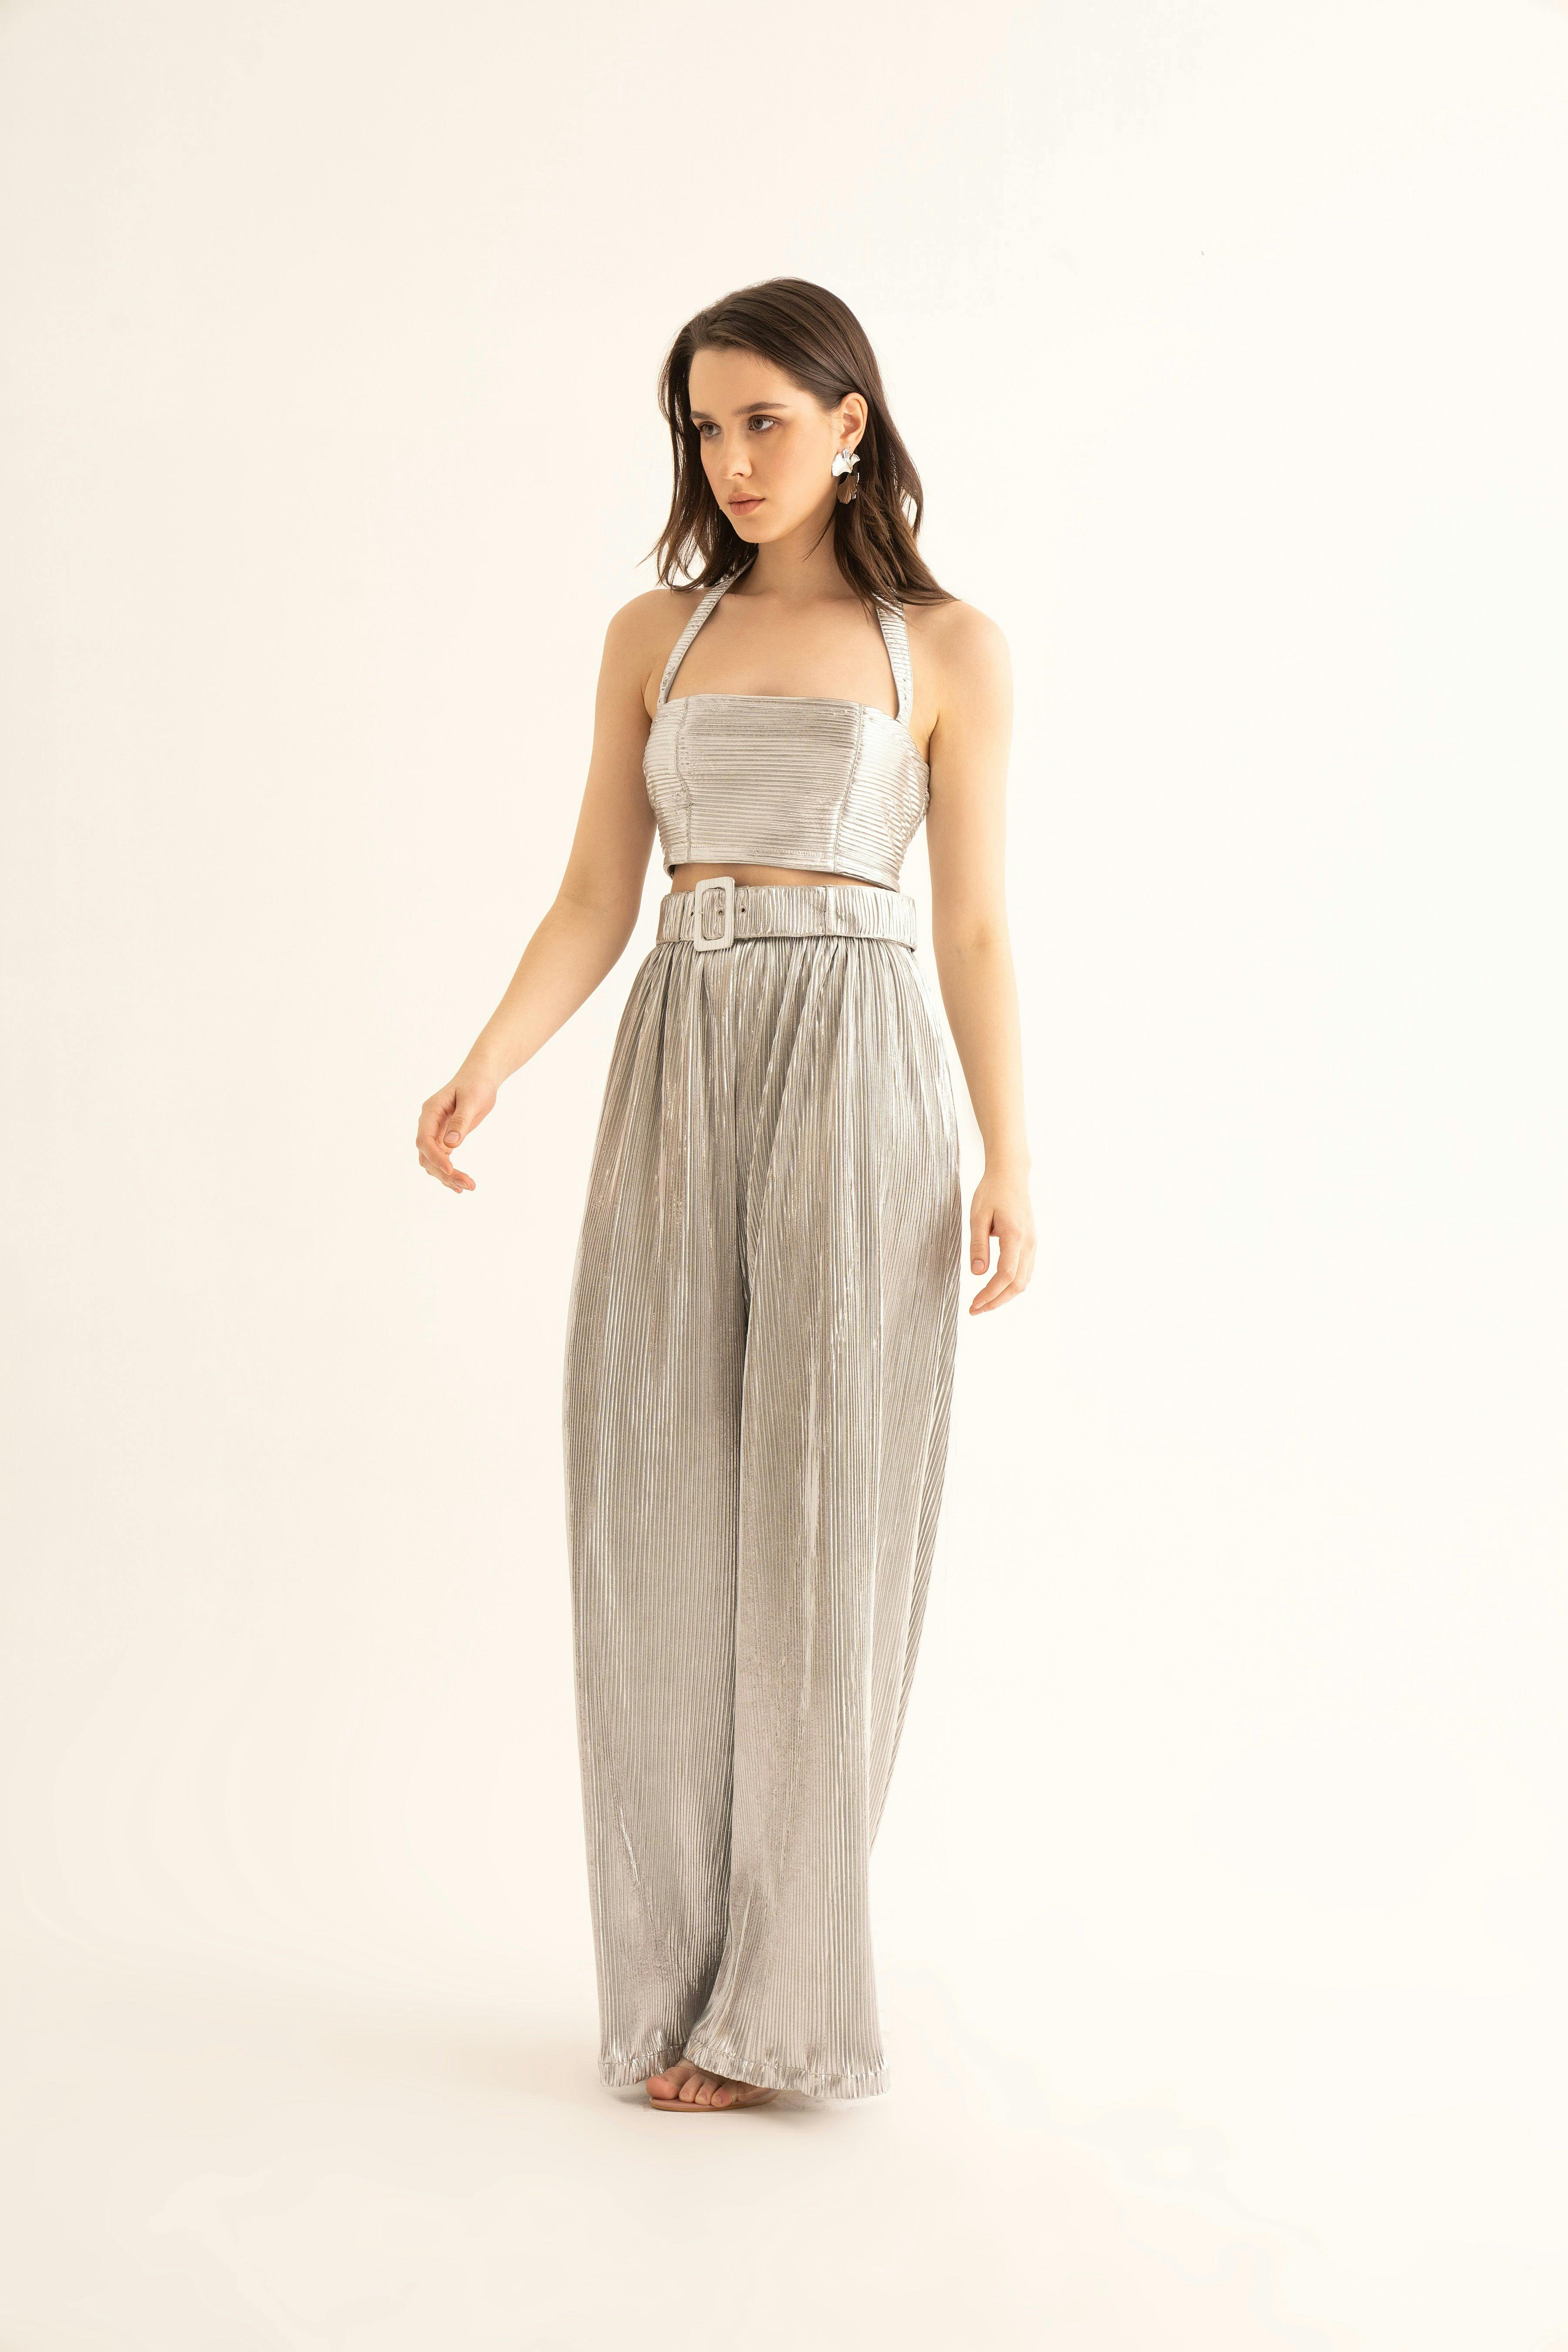 Silver Pleated Belted Pants, a product by Torqadorn